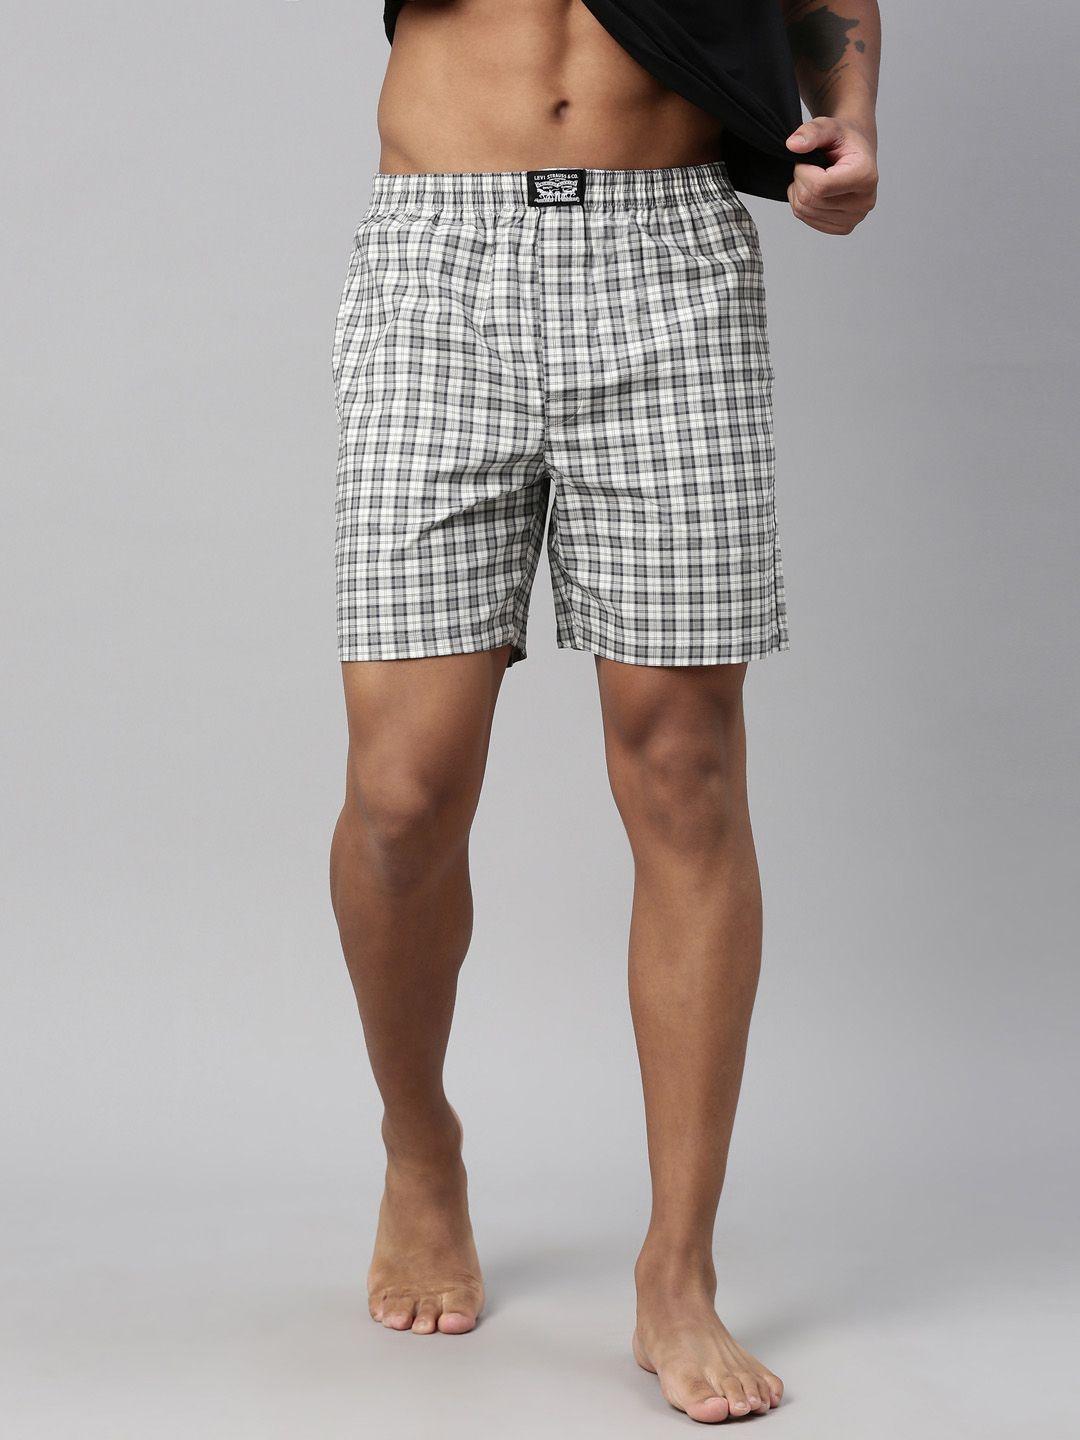 levis-men-checked-smartskin-technology-woven-cotton-boxers-with-tag-free-comfort-024